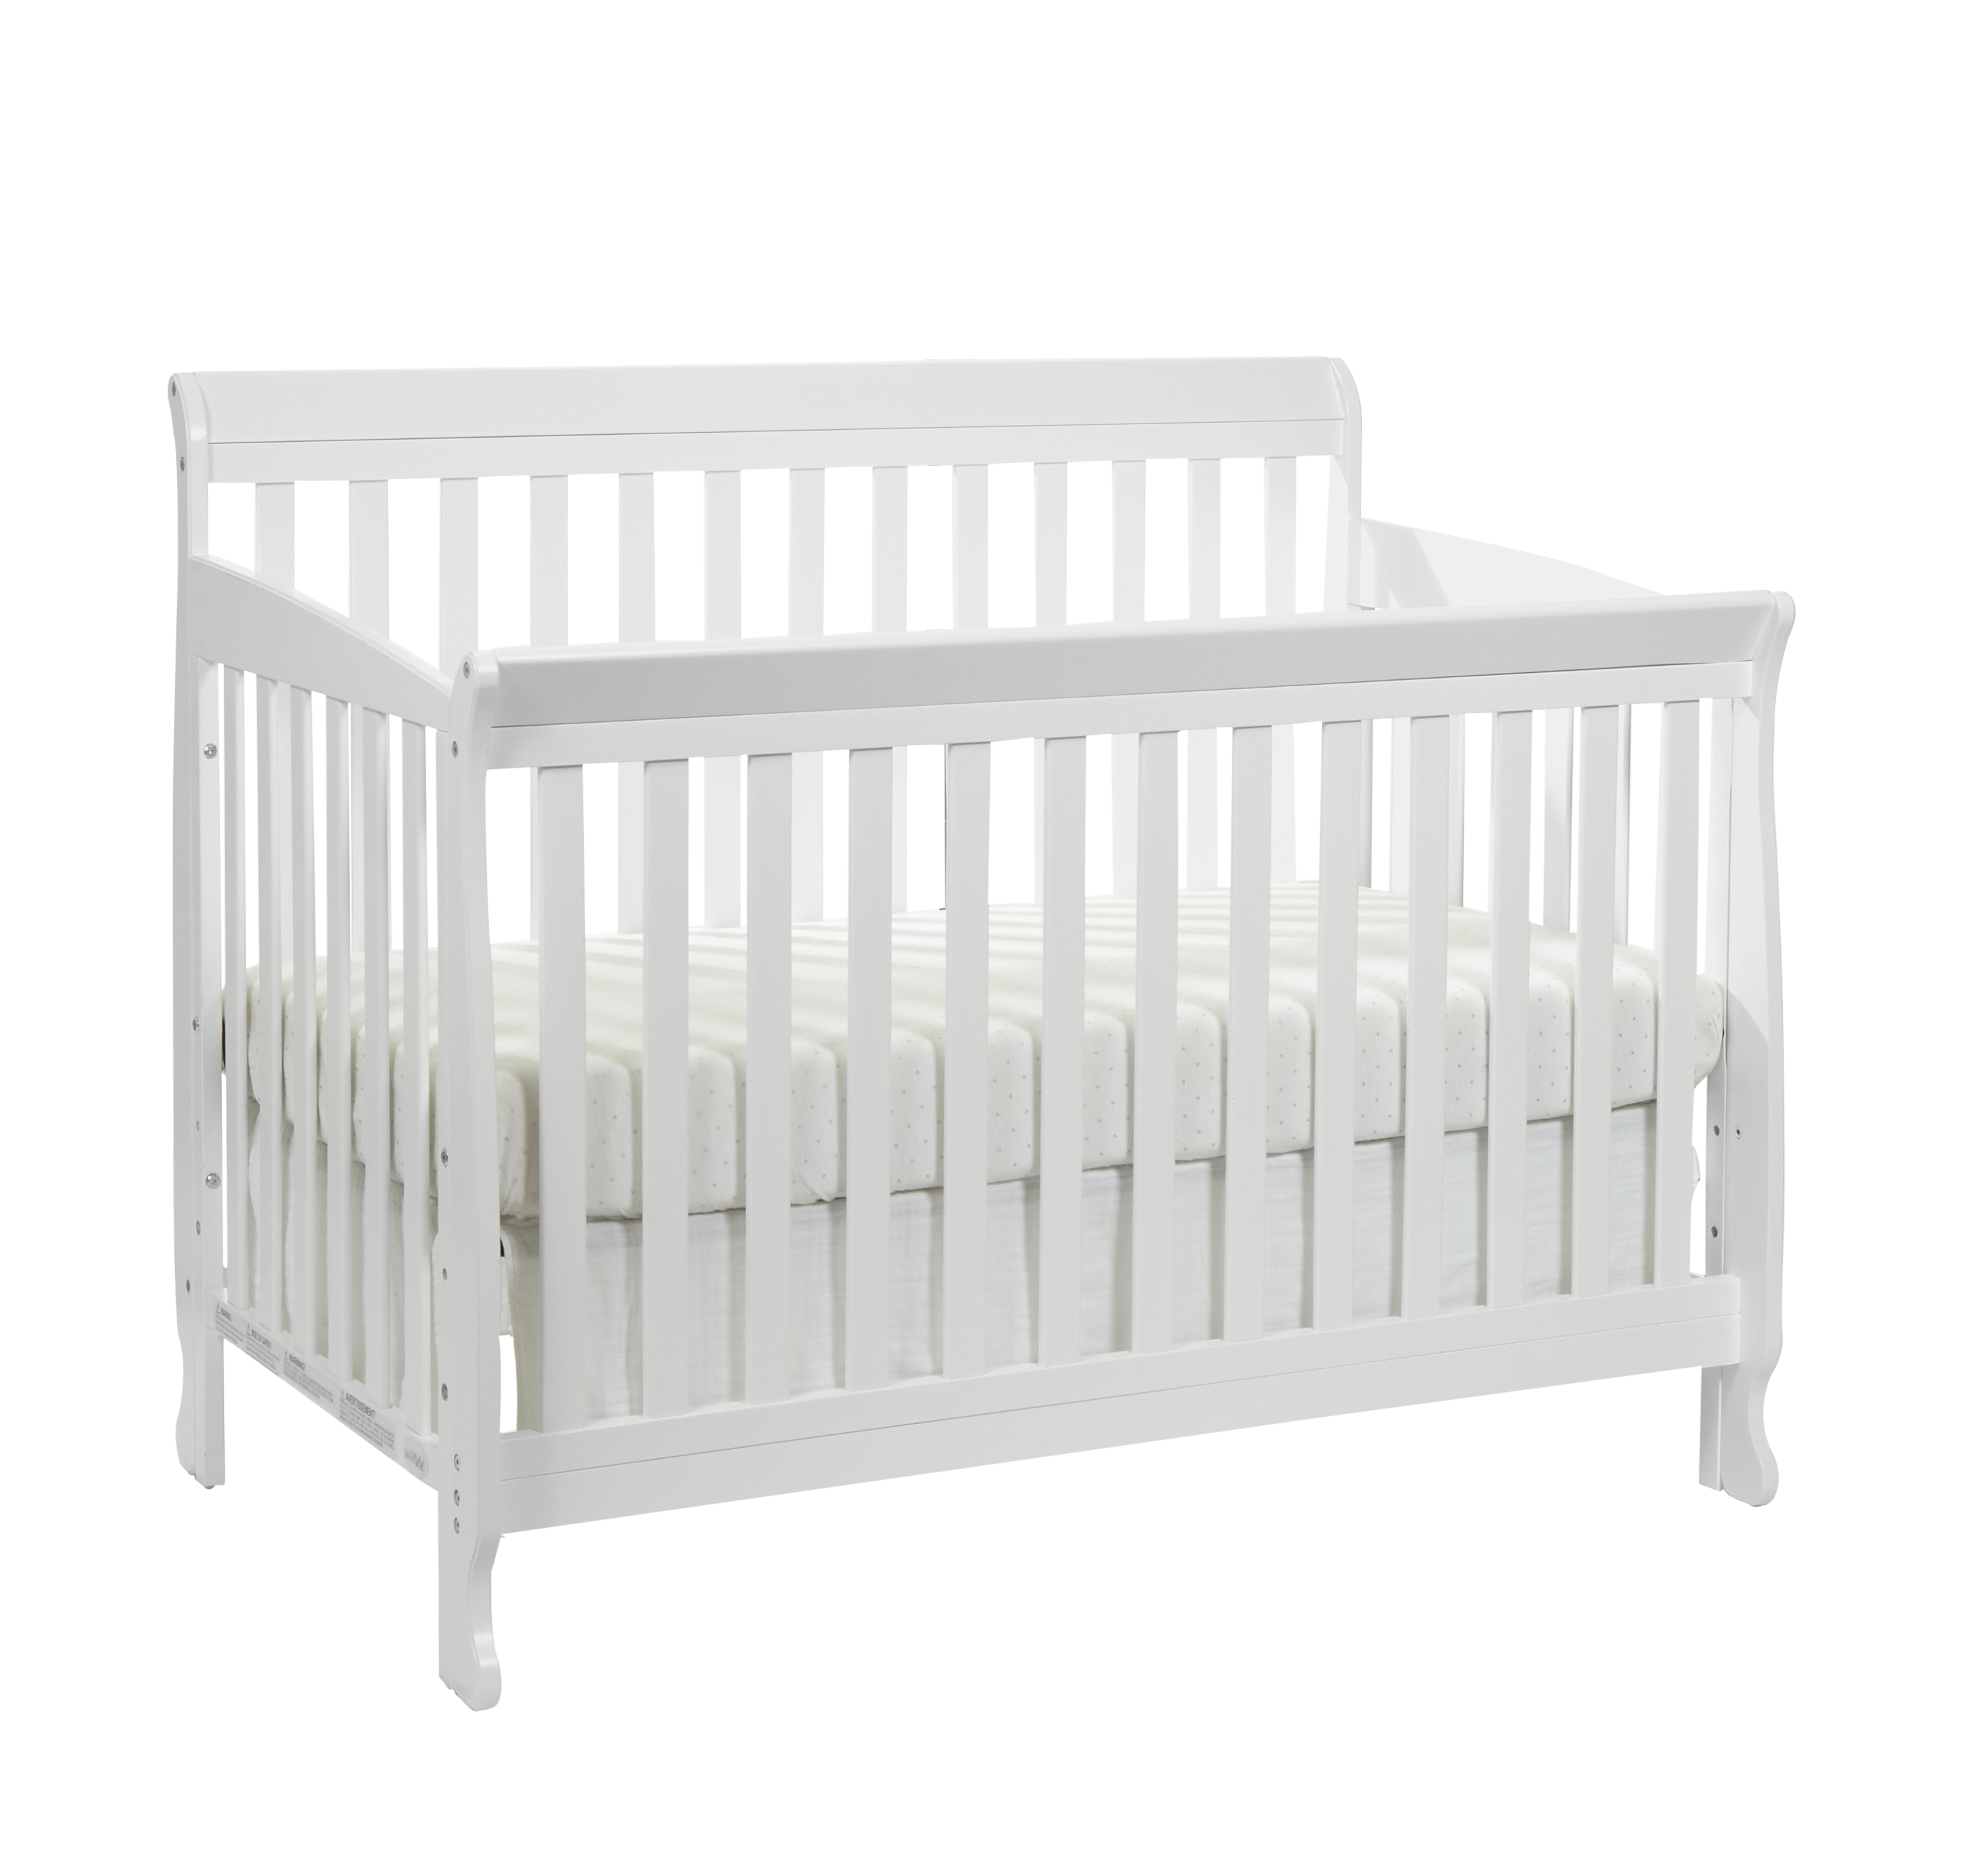 Suite Bebe Riley Crib and Toddler Guard Rail Bundle, White - image 5 of 9